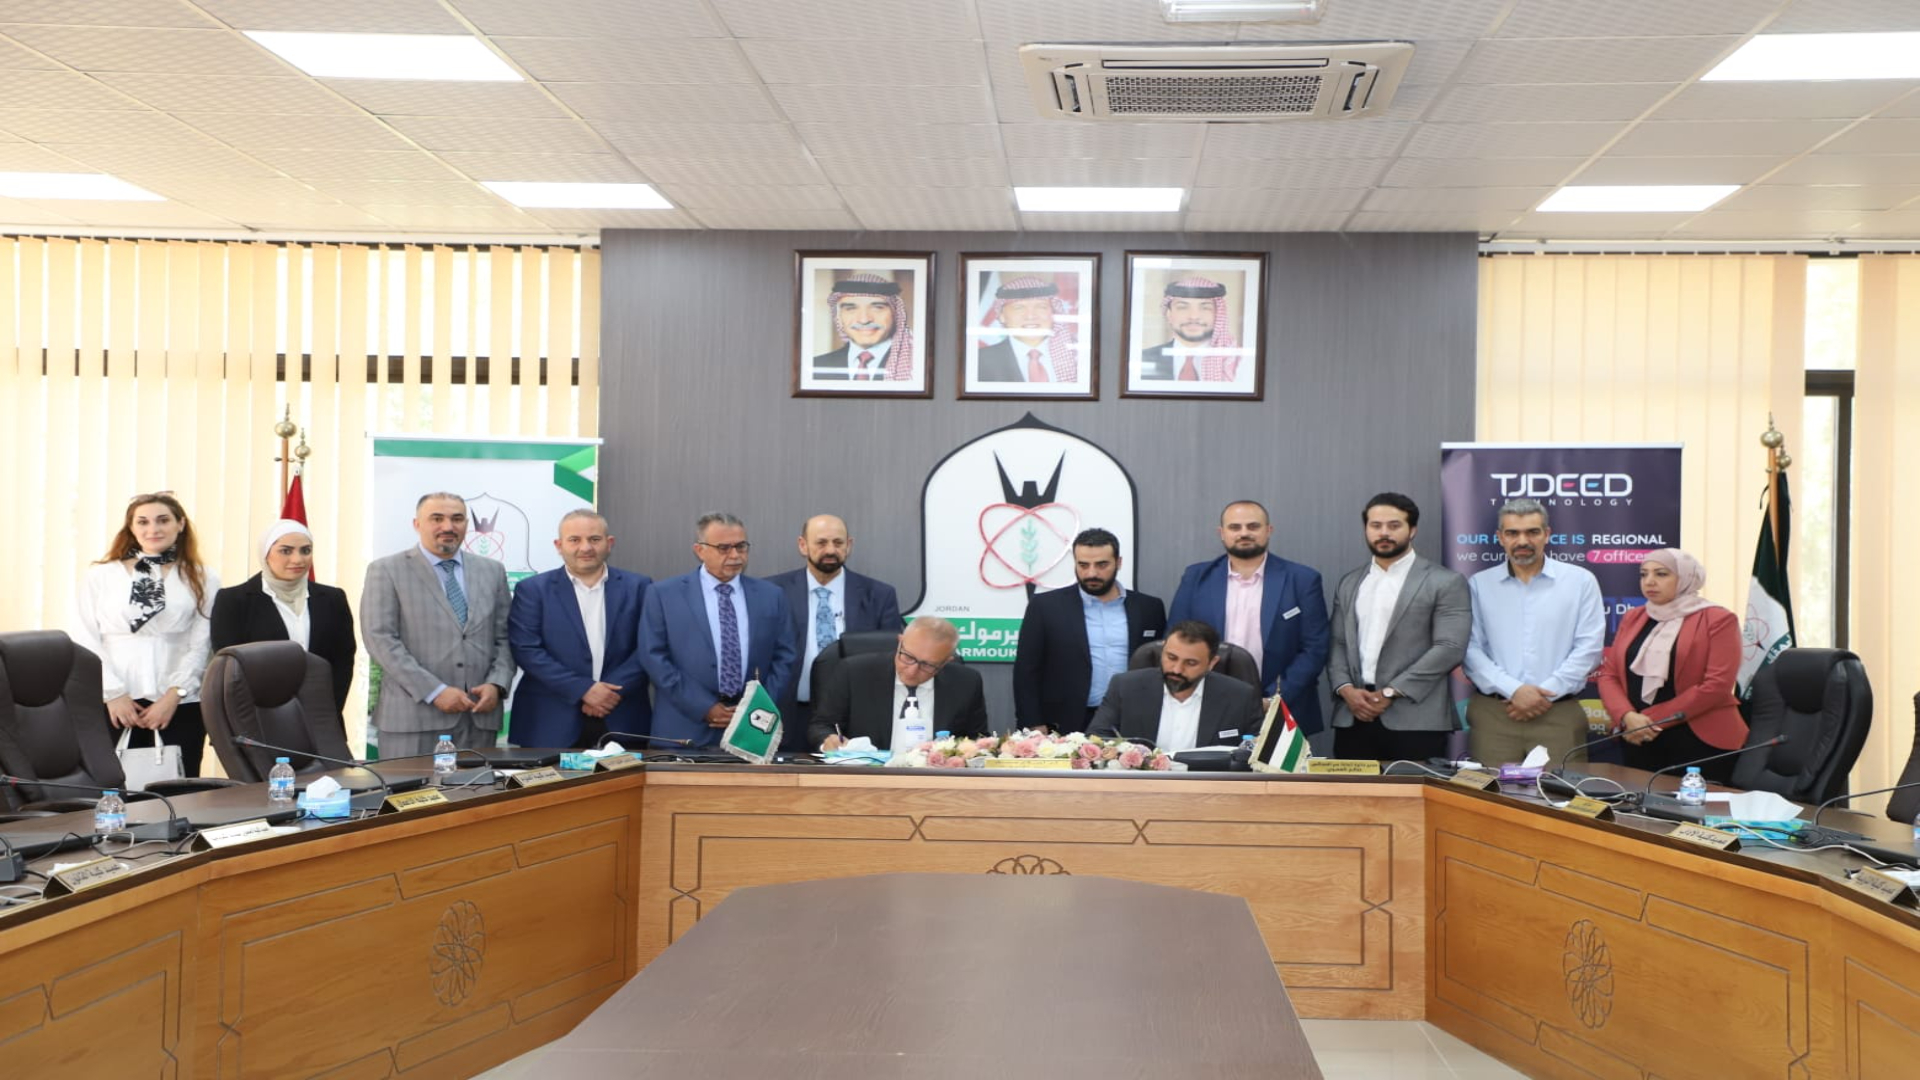 TjDeeD Technology and Yarmouk University Sign an Agreement to Establish and Operate Technology Incubator